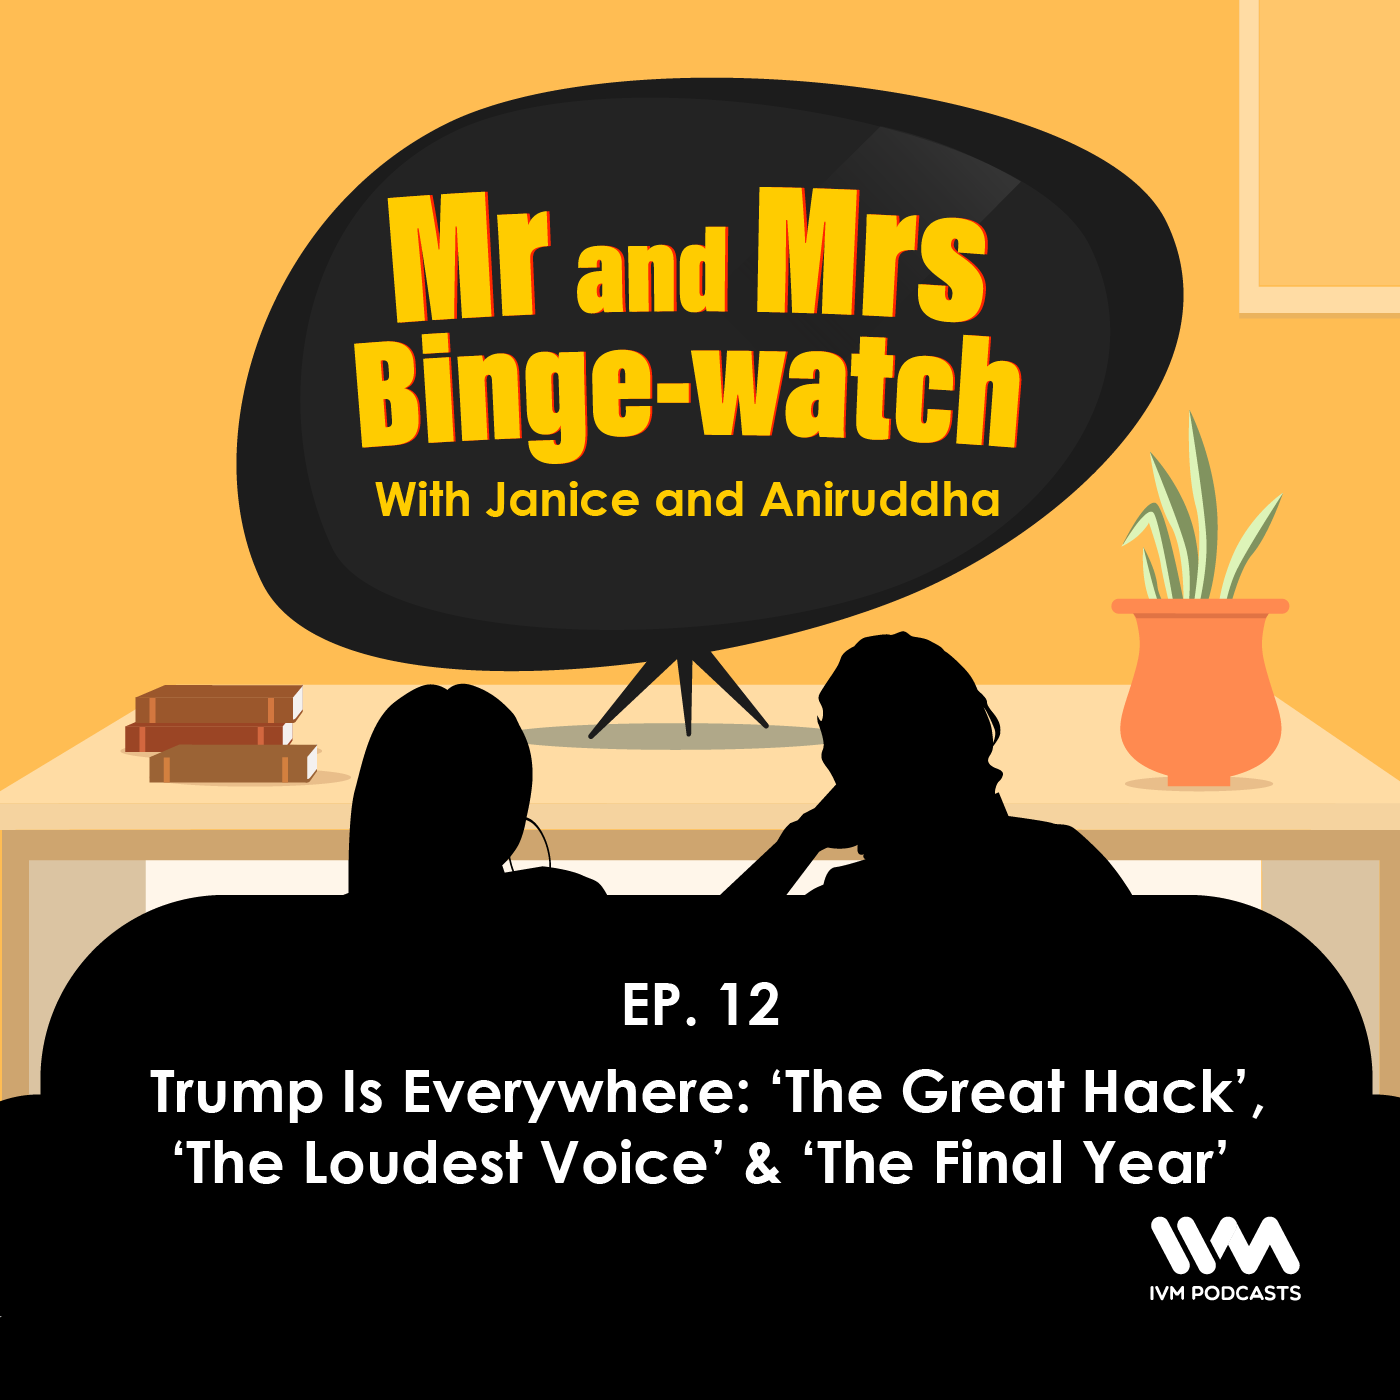 Ep. 12: Trump Is Everywhere: ‘The Great Hack’, ‘The Loudest Voice’ & ‘The Final Year’